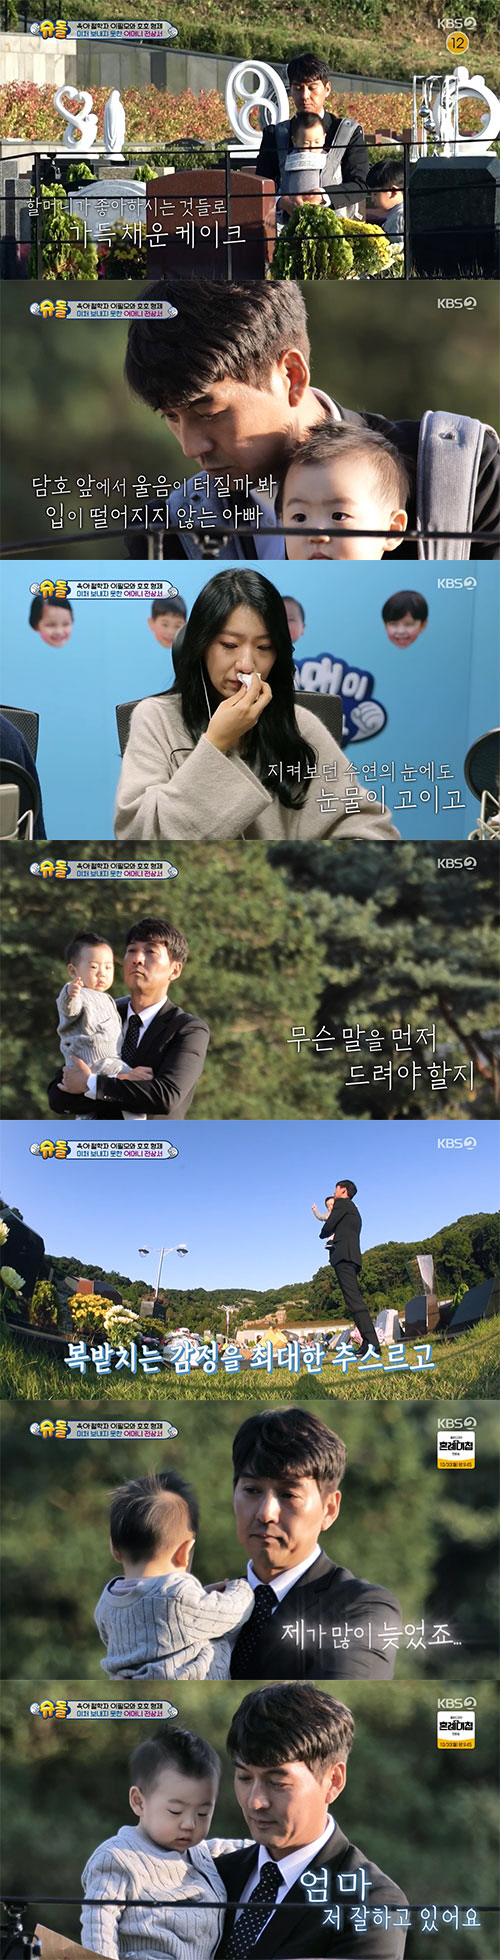 Actor Lee Pil-mo found the oxygen of his mother who died suddenly in March this year with his two sons.On the 24th, KBS2 entertainment program The Return of Superman was decorated with So Yoo-jin and Changmins narration as I want to see you again and again.Lee Pil-mo, who first appeared in the last broadcast and took a picture of his lovely life with his two sons, visited the memorial park for his mothers birthday, which died with his two sons dam lake, Toho Co., Ltd.On that day, Lee Pil-mo told Seo Su-yeon, Im going to visit my mother. I was too busy to go. It was my first birthday.Lee Pil-mo said, Mother was suddenly diagnosed with cerebral infarction on December 23 last year.He entered the Baro emergency room and died in March of this year. Mother is the one who bought life for her husband and children.Lee Pil-mo said to his son dam lake, Lets paint a picture, and dam lake started painting on the spot.Dam lake, who started drawing heart balloons for Grandmas Boy who died, began to draw harder than ever. Dam lake, who completed the painting, impressed himself by writing I love Grandmas Boy.Lee Pil-mo also started making cakes with his son for his mother and laughed as dam lake coached for his awkward father.Lee Pil-mo said: I havent had Mother in my mind since March 4th - I havent had time to do that and Ive been too busy.It was my first birthday, but I could not go and I thought I should go up and go to Baro when I finished shooting. Lee Pil-mo, dressed neatly and arriving at Mothers Memorial Park, sang a birthday song with a cake made with a picture gift drawn by dam lake.Lee Pil-mo was singing a birthday song, and dam lake said, I have to cut a cake for Grandmas Boy.In the end, Lee Pil-mo began to shed Tears, and Seo Soo-yeon, who watched the video in the studio, also showed Tears.Also, dam lake said, Ill go over there for a while, and I left for a while. At this time, Lee Pil-mo looked at his mothers face for a long time and thought for a moment.Lee Pil-mo called Mom shortly and said, Its a birthday cake made by dam lake. Its my mothers birthday and I worked. dam lake does not know yet.I do not come to the playground, but Im playing. I look like my mother and I like nature. Lee Pil-mo said, He loved nature. When the flowers are in full bloom, I think more. Lee Pil-mo said, I brought the kids to see my face for a long time. Toho Co., Ltd.Toho Co., Ltd. now walks. mom dam lake wrote: Grandmas boy I love you, she wrote, stealing the flowing Tears.On the same day, son dam lake began to draw his brother Toho Co., Ltd. and mother, Father face before Father Lee Pil-mo woke up.Dam lake wrote his name in Korean, and he showed his brother, mother, and fathers name carefully.Then dam lake went into the room where Father slept and woke up Father with his brother, and Father, who returned home in 10 days after the local filming, showed a happy appearance when he saw his two sons.After waking up, the father was happy to see the family painted by dam lake. Lee Pil-mo then set up a healthy breakfast table for the family, and his son dam lake showed good eating from seaweed stem to fern egg.Seo Su-yeon, who saw her husband coming home after a long time, asked, Are you tired? Lee Pil-mo said, Its mental strength. Once upon a time, I slept every two days.Seo Soo-yeon said to Lee Pil-mo before going to work, You have to separate your brother. At that time, his son dam lake helped his father to collect and collect his fathers praise.Actor Father and son laughed as they showed sunglasses and went out for separate collection.Lee Pil-mo also told Seo Soo-yeon, who was doing The Speech to go to work, Its cold outside my baby. So Yoo-jin and Changmin in the studio laughed at the title Baby.